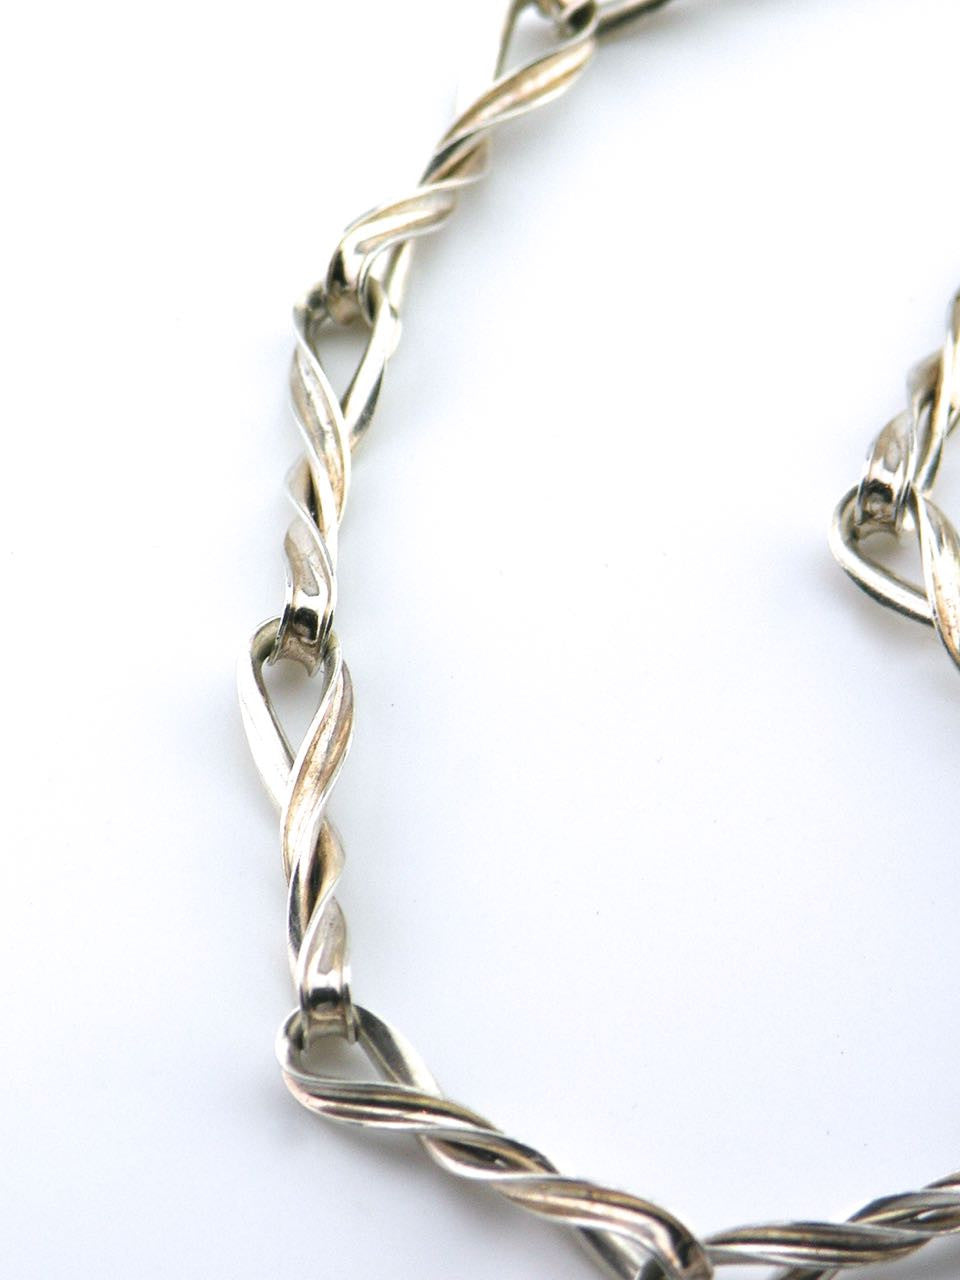 Flat Marine Italian Design Silver Chain Bracelet / Replacement Chain / 925  Sterling Silver / Unisex Chain Bracelet / Gift for Woman - Etsy